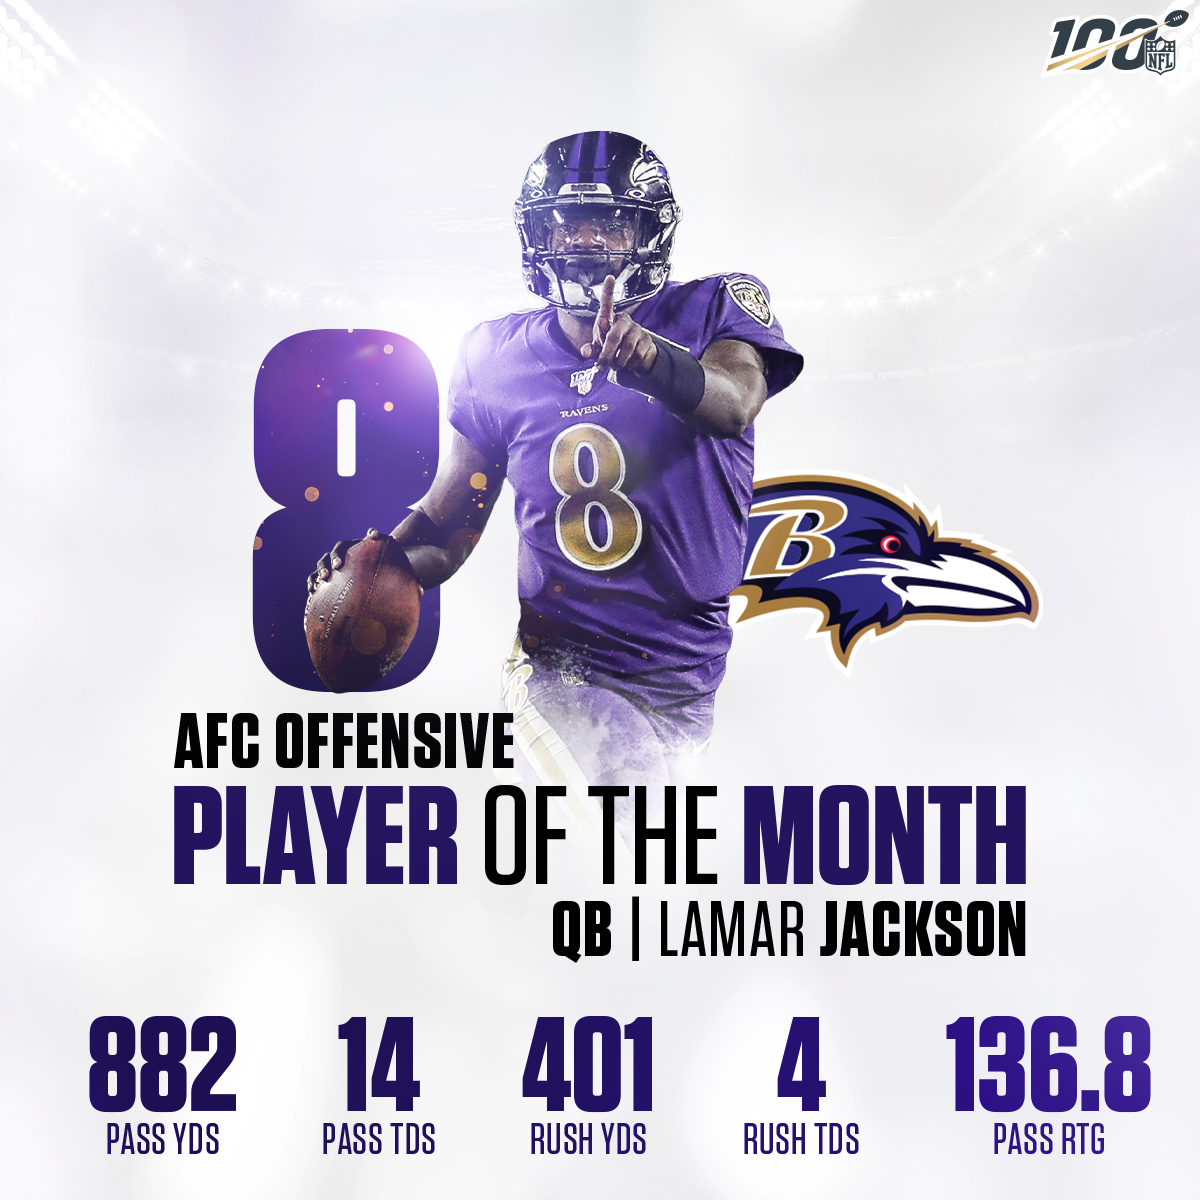 AFC offensive player of the month